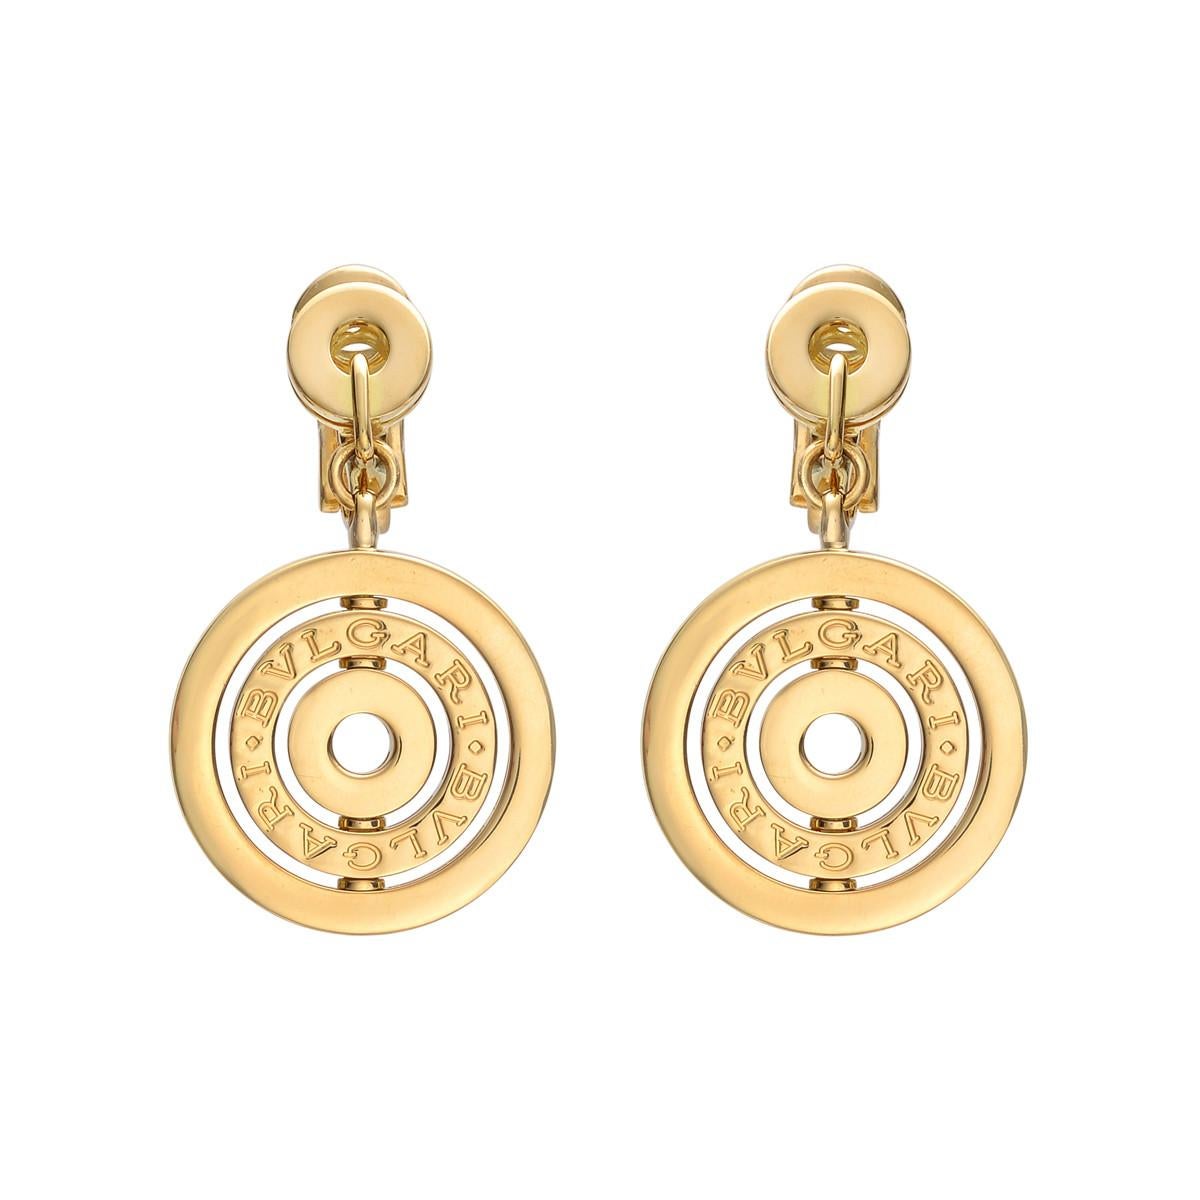 A chic set of authentic Bulgari earrings showcasing the iconic circular motif engraved with Bvlgari Bvlgari in 18k yellow gold. The earrings measure 1.37